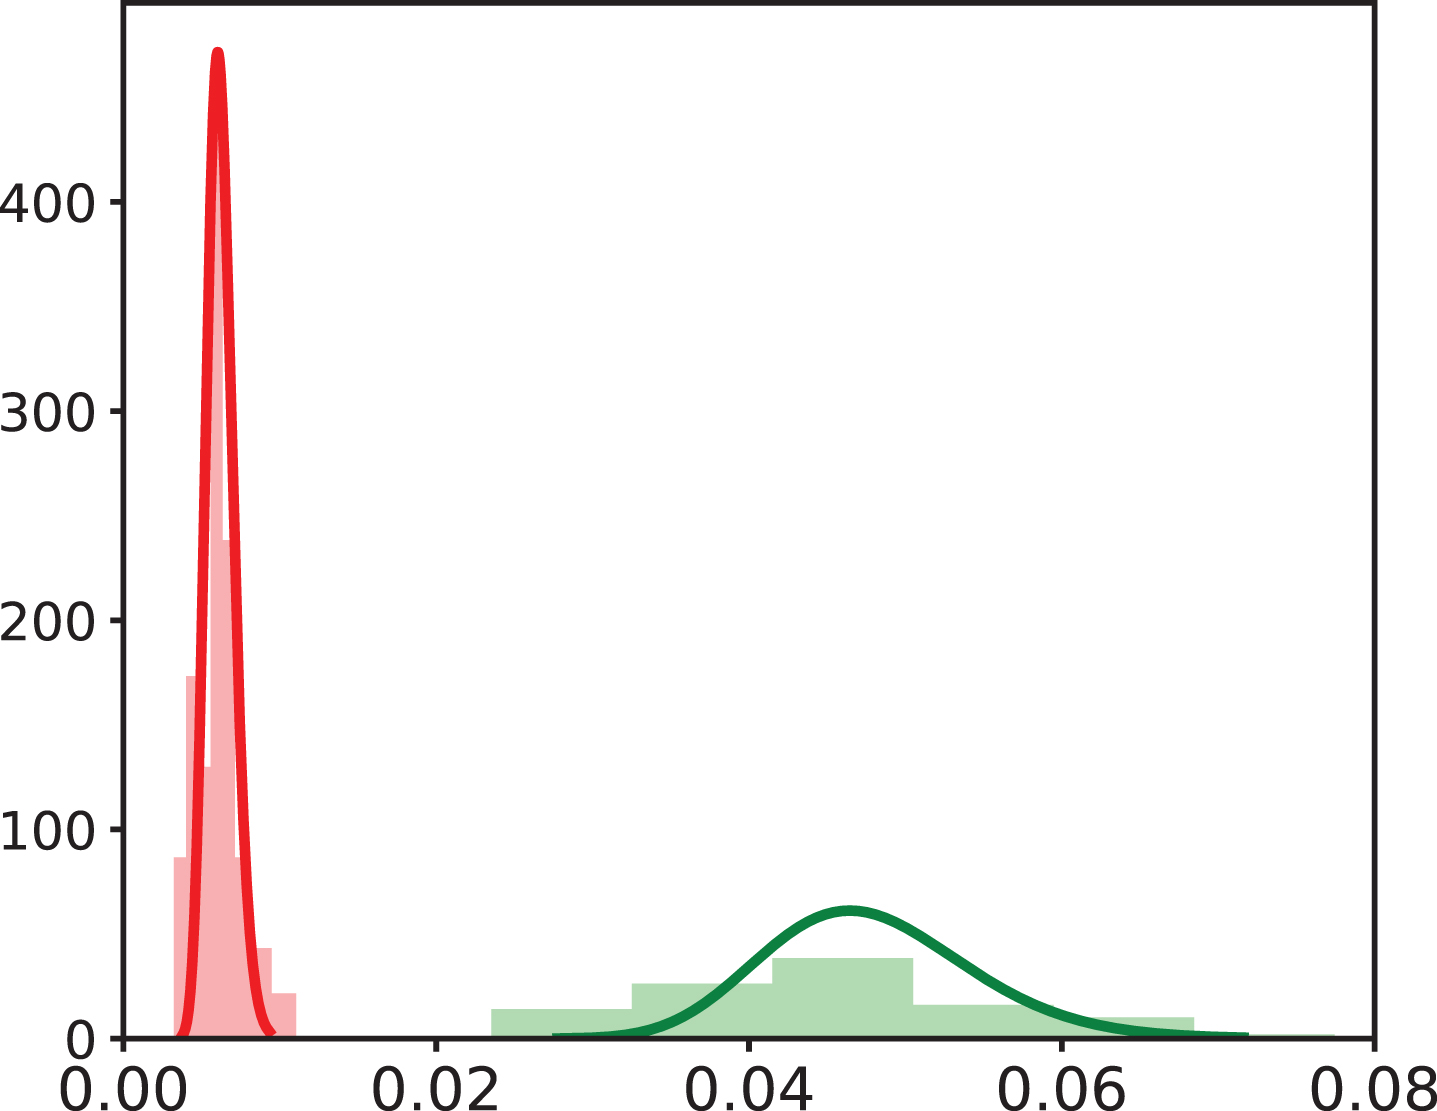 Probability distribution of parameter δNE defined with a covariate. Estimated distributions of VV-associated (left, red) and Tumor-associated (right, green) values are plotted. Histograms of estimated individual parameter values are also plotted (red for VV-associated values, green for Tumor-associated values).